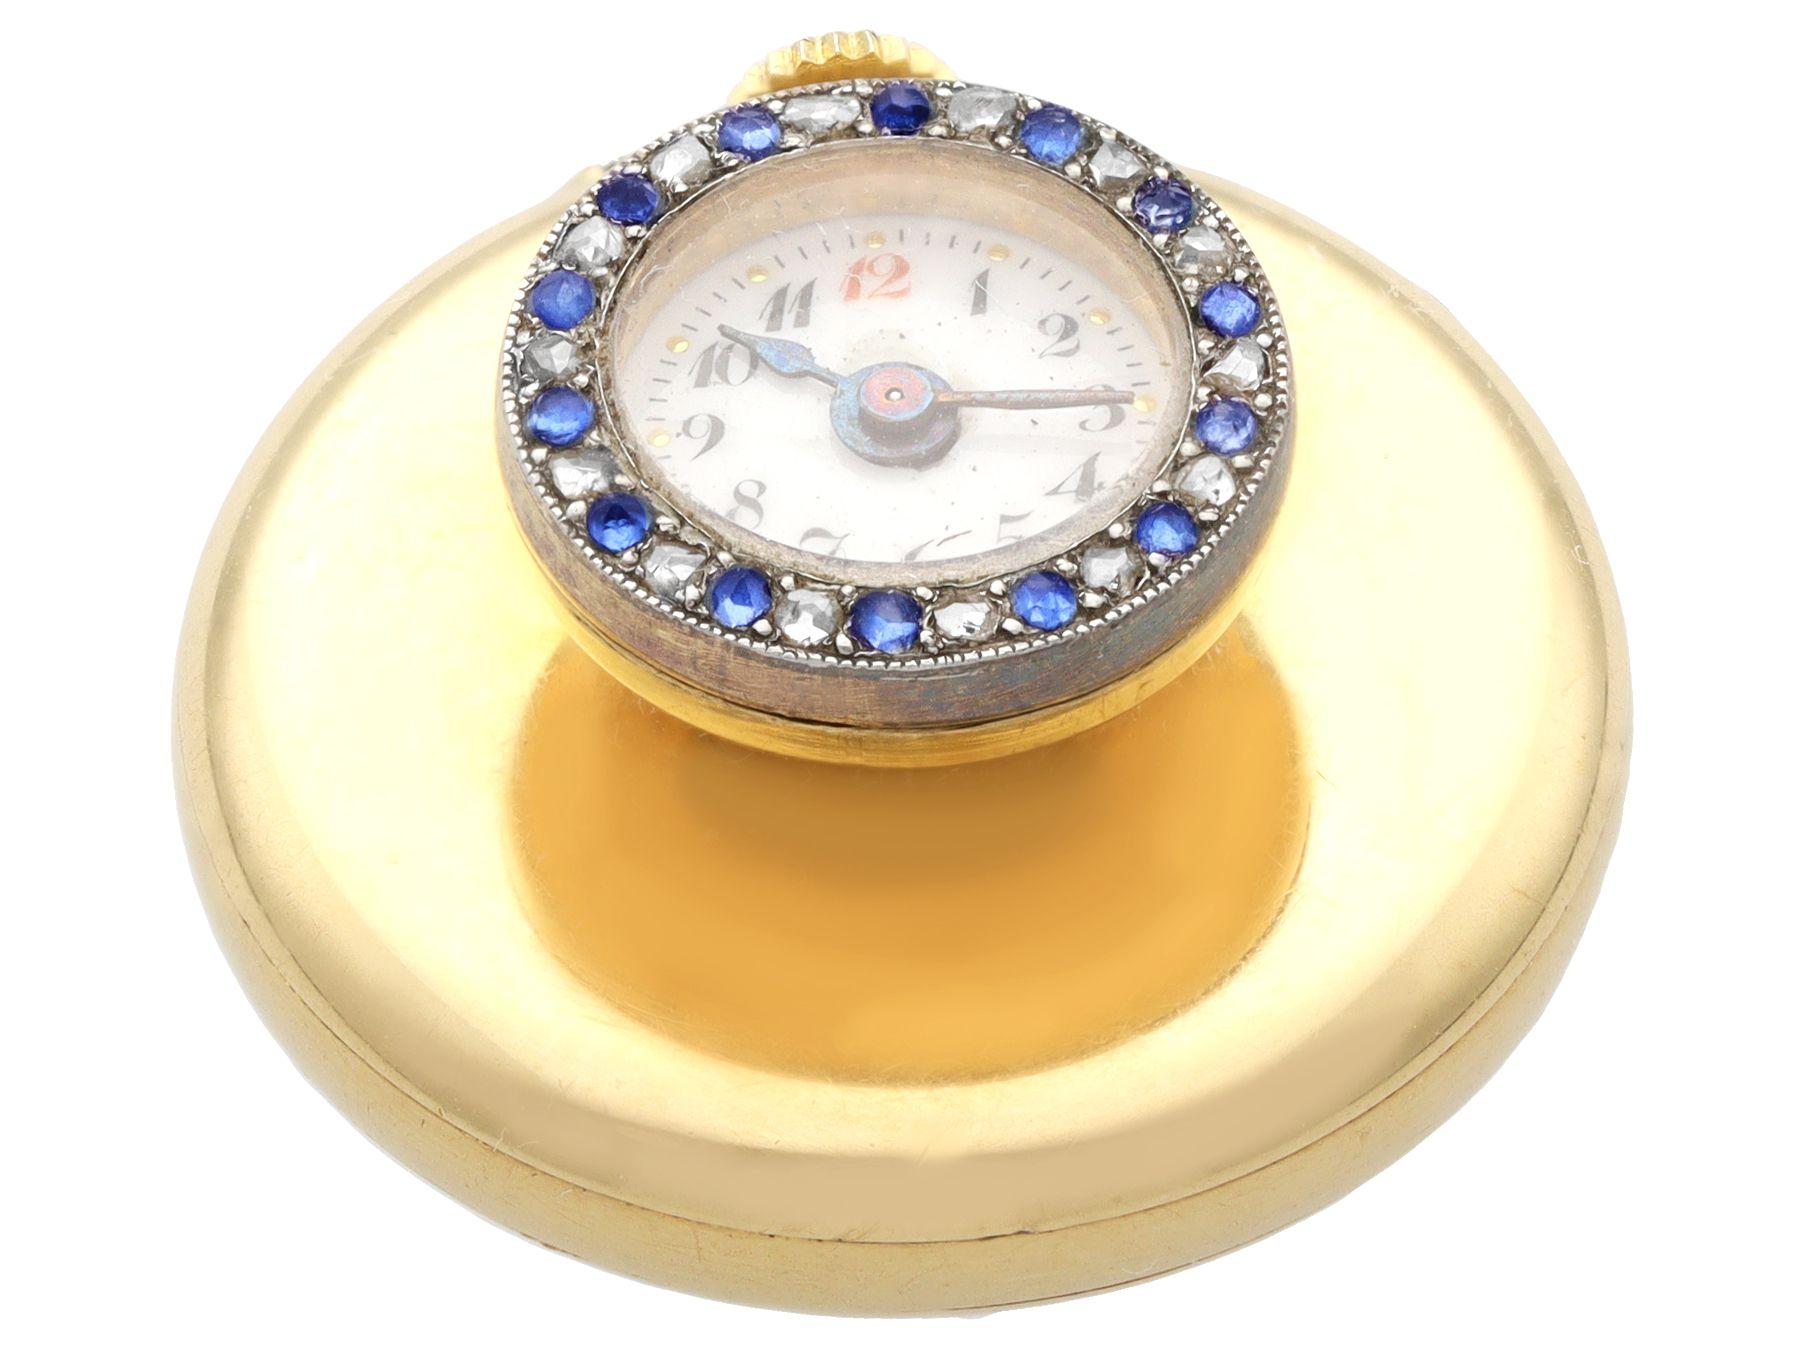 A fine and impressive antique Swiss 0.15 carat sapphire and 0.09 carat diamond, 18 karat yellow gold lapel watch; part of our diverse antique jewelry and estate jewelry collections

This fine and impressive antique lapel watch has been crafted in